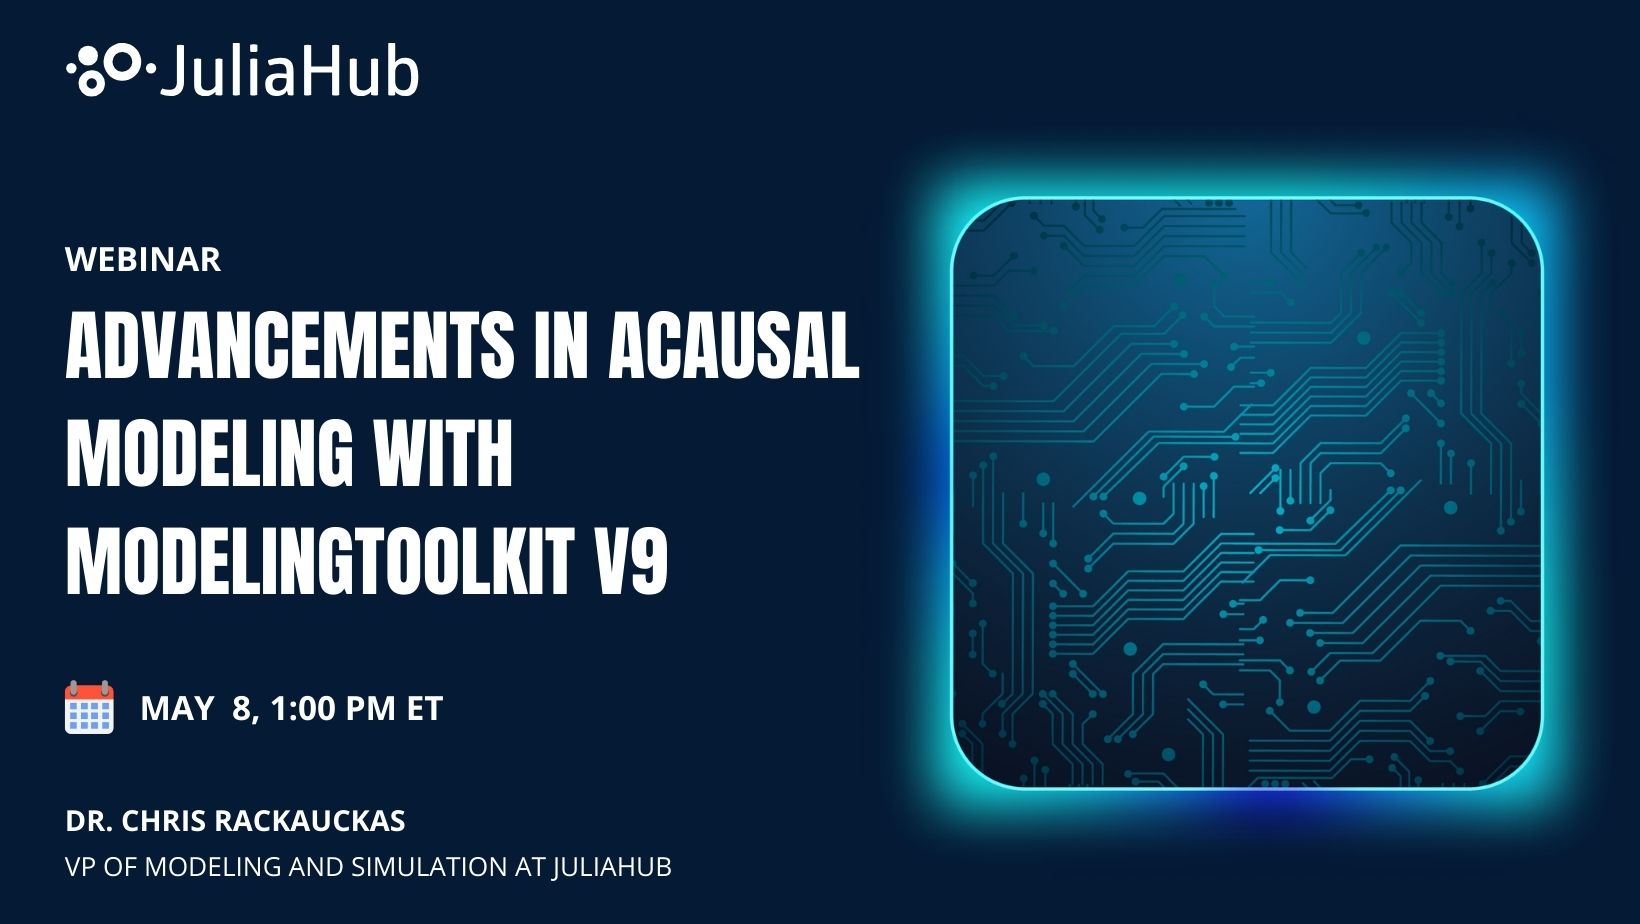 Advancements in Acausal Modeling with ModelingToolkit v9 | JuliaHub Upcoming Webinar